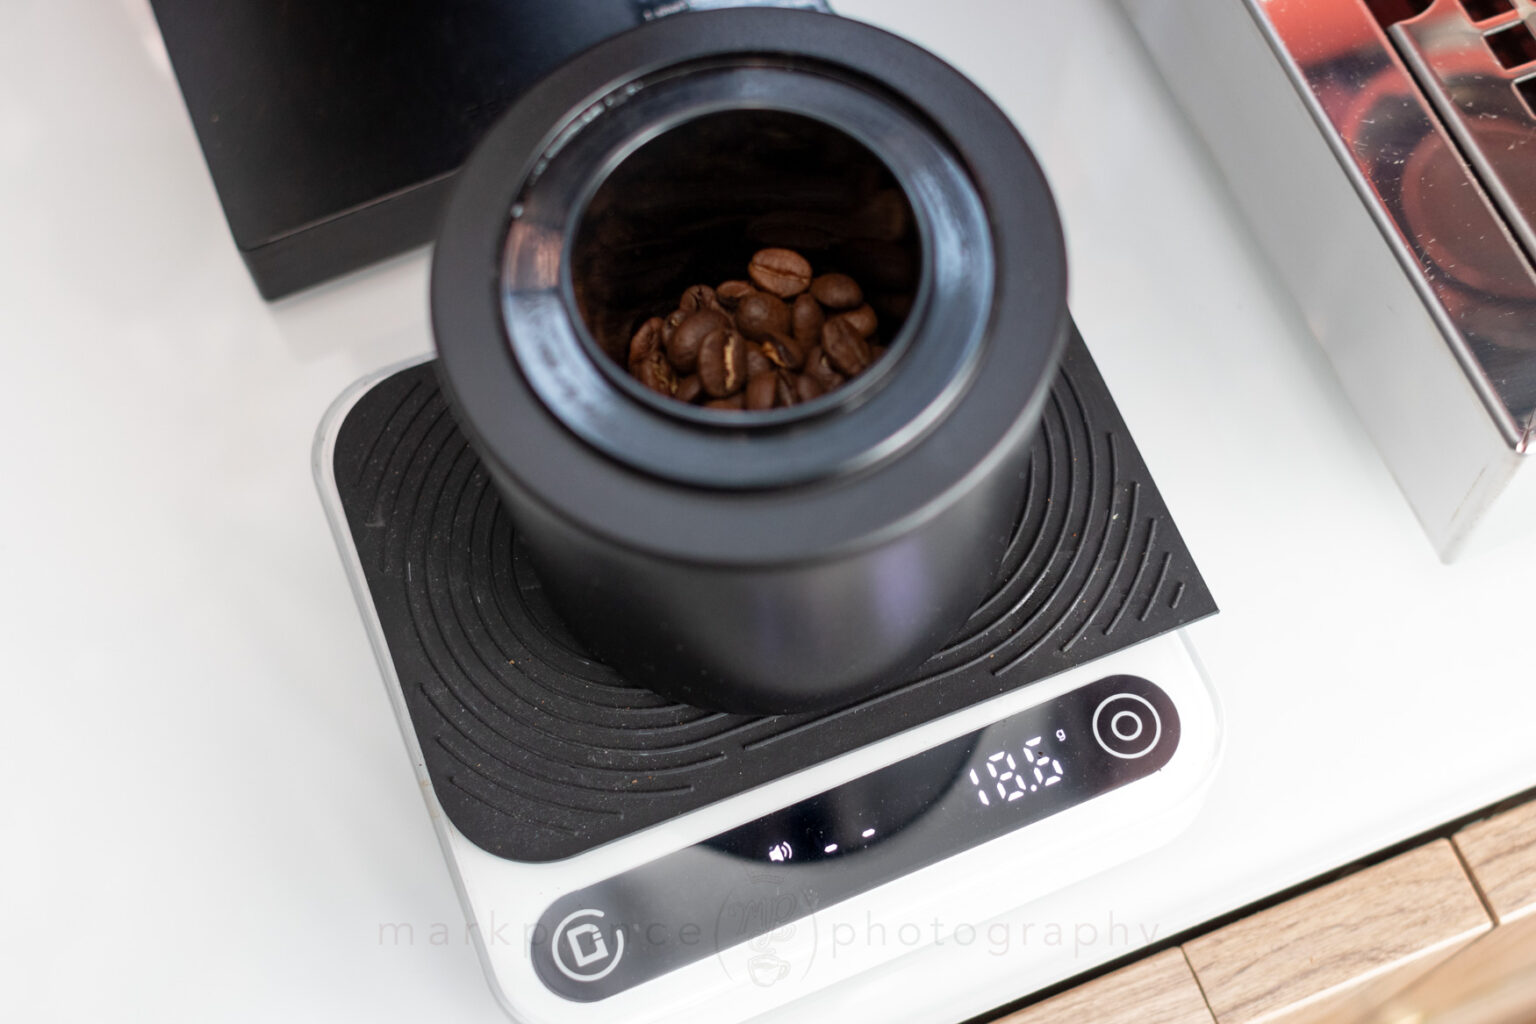 Measuring out 18.6g for espresso grinding on the Fellow Opus